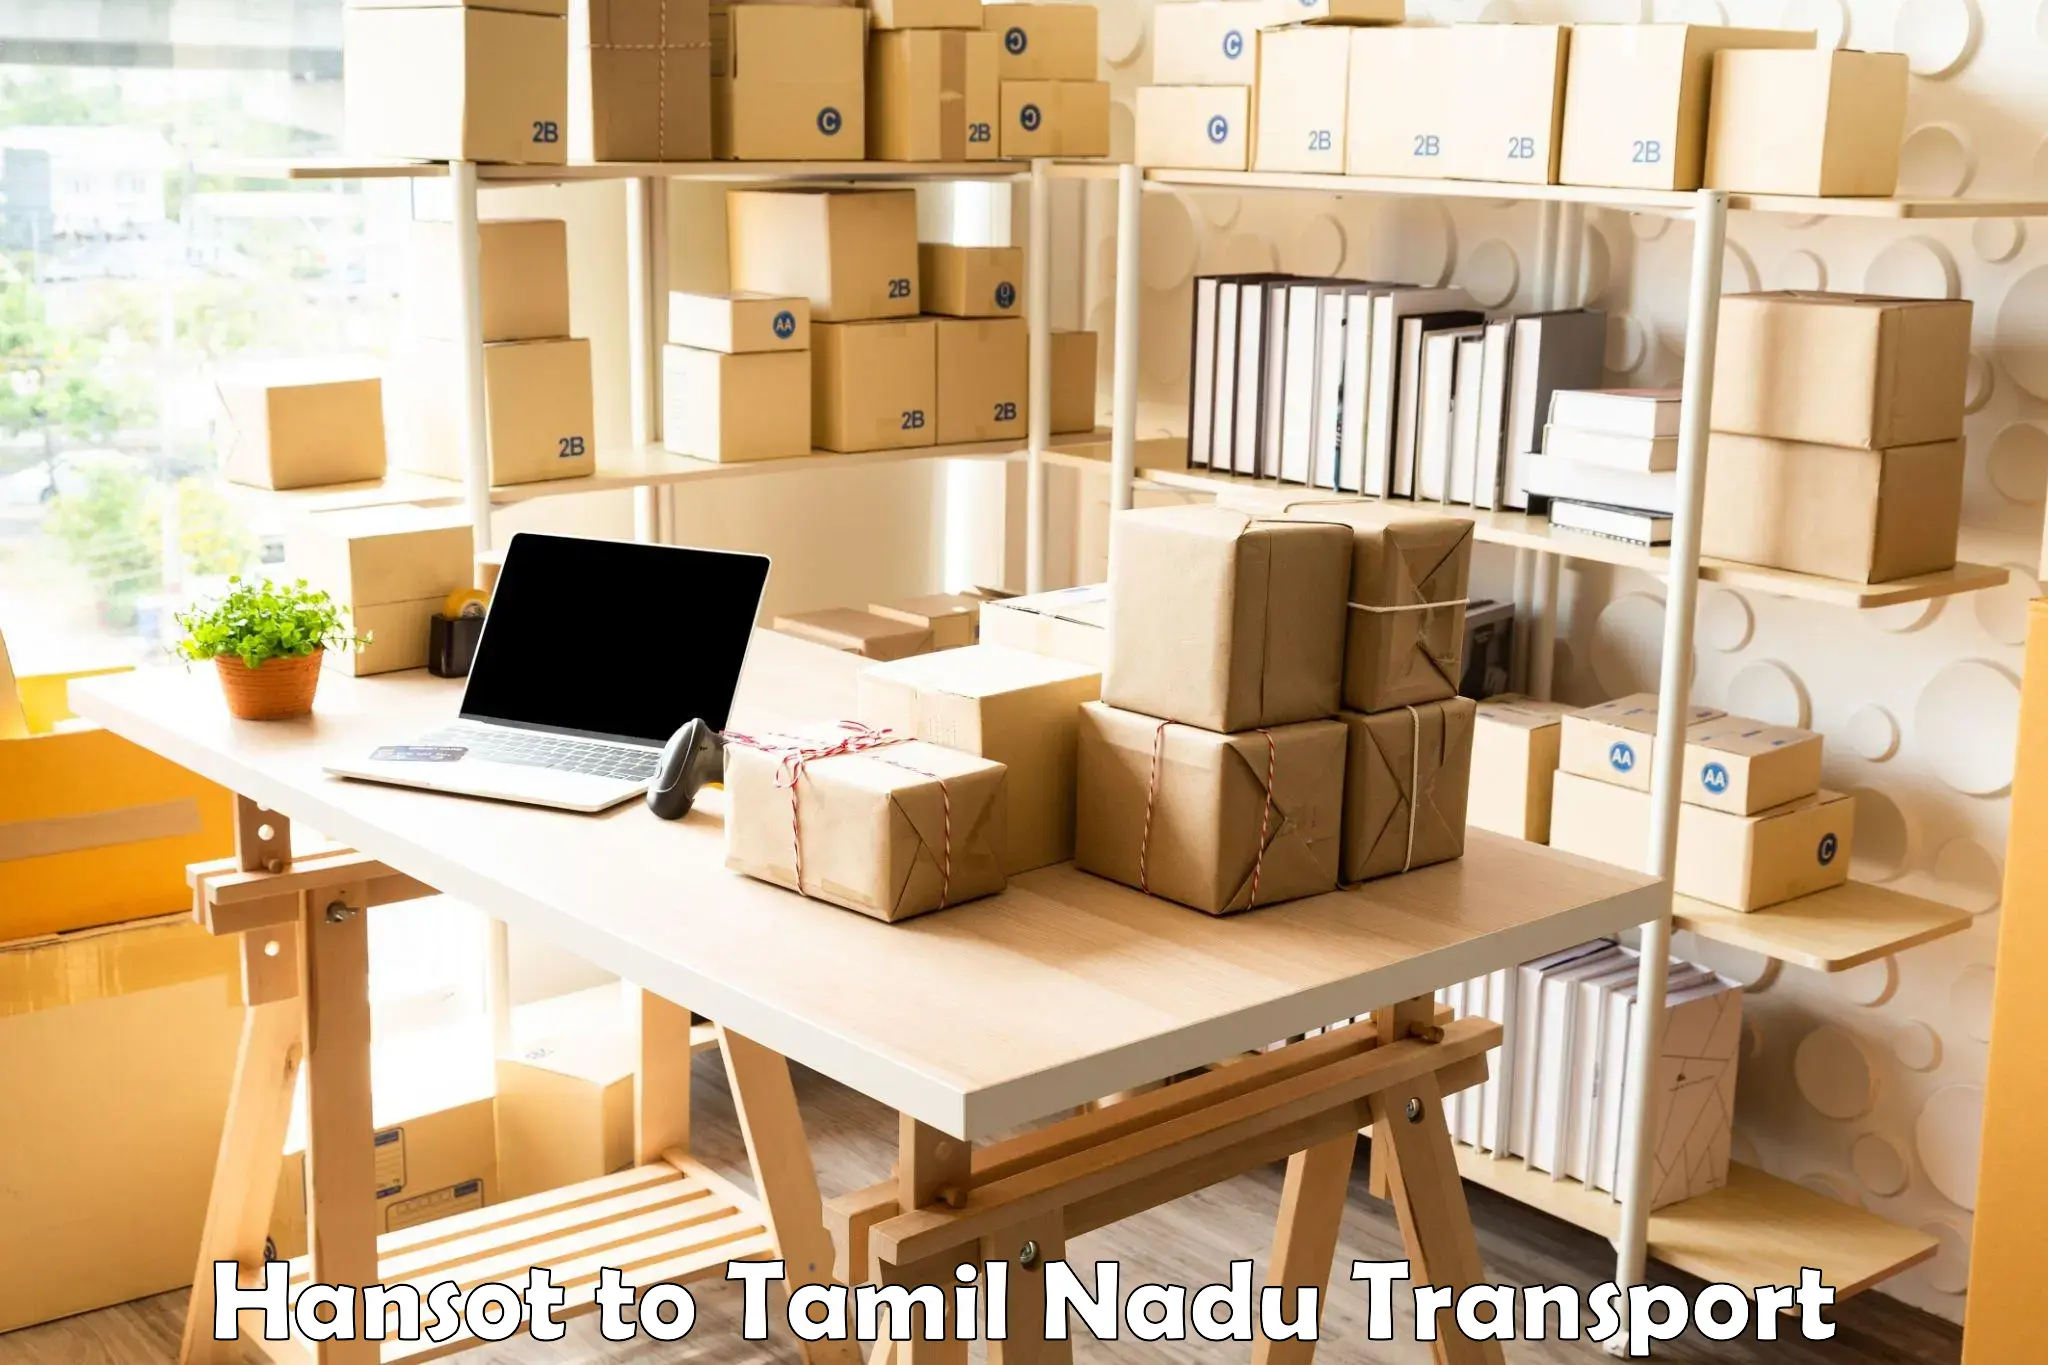 Container transportation services Hansot to Memalur